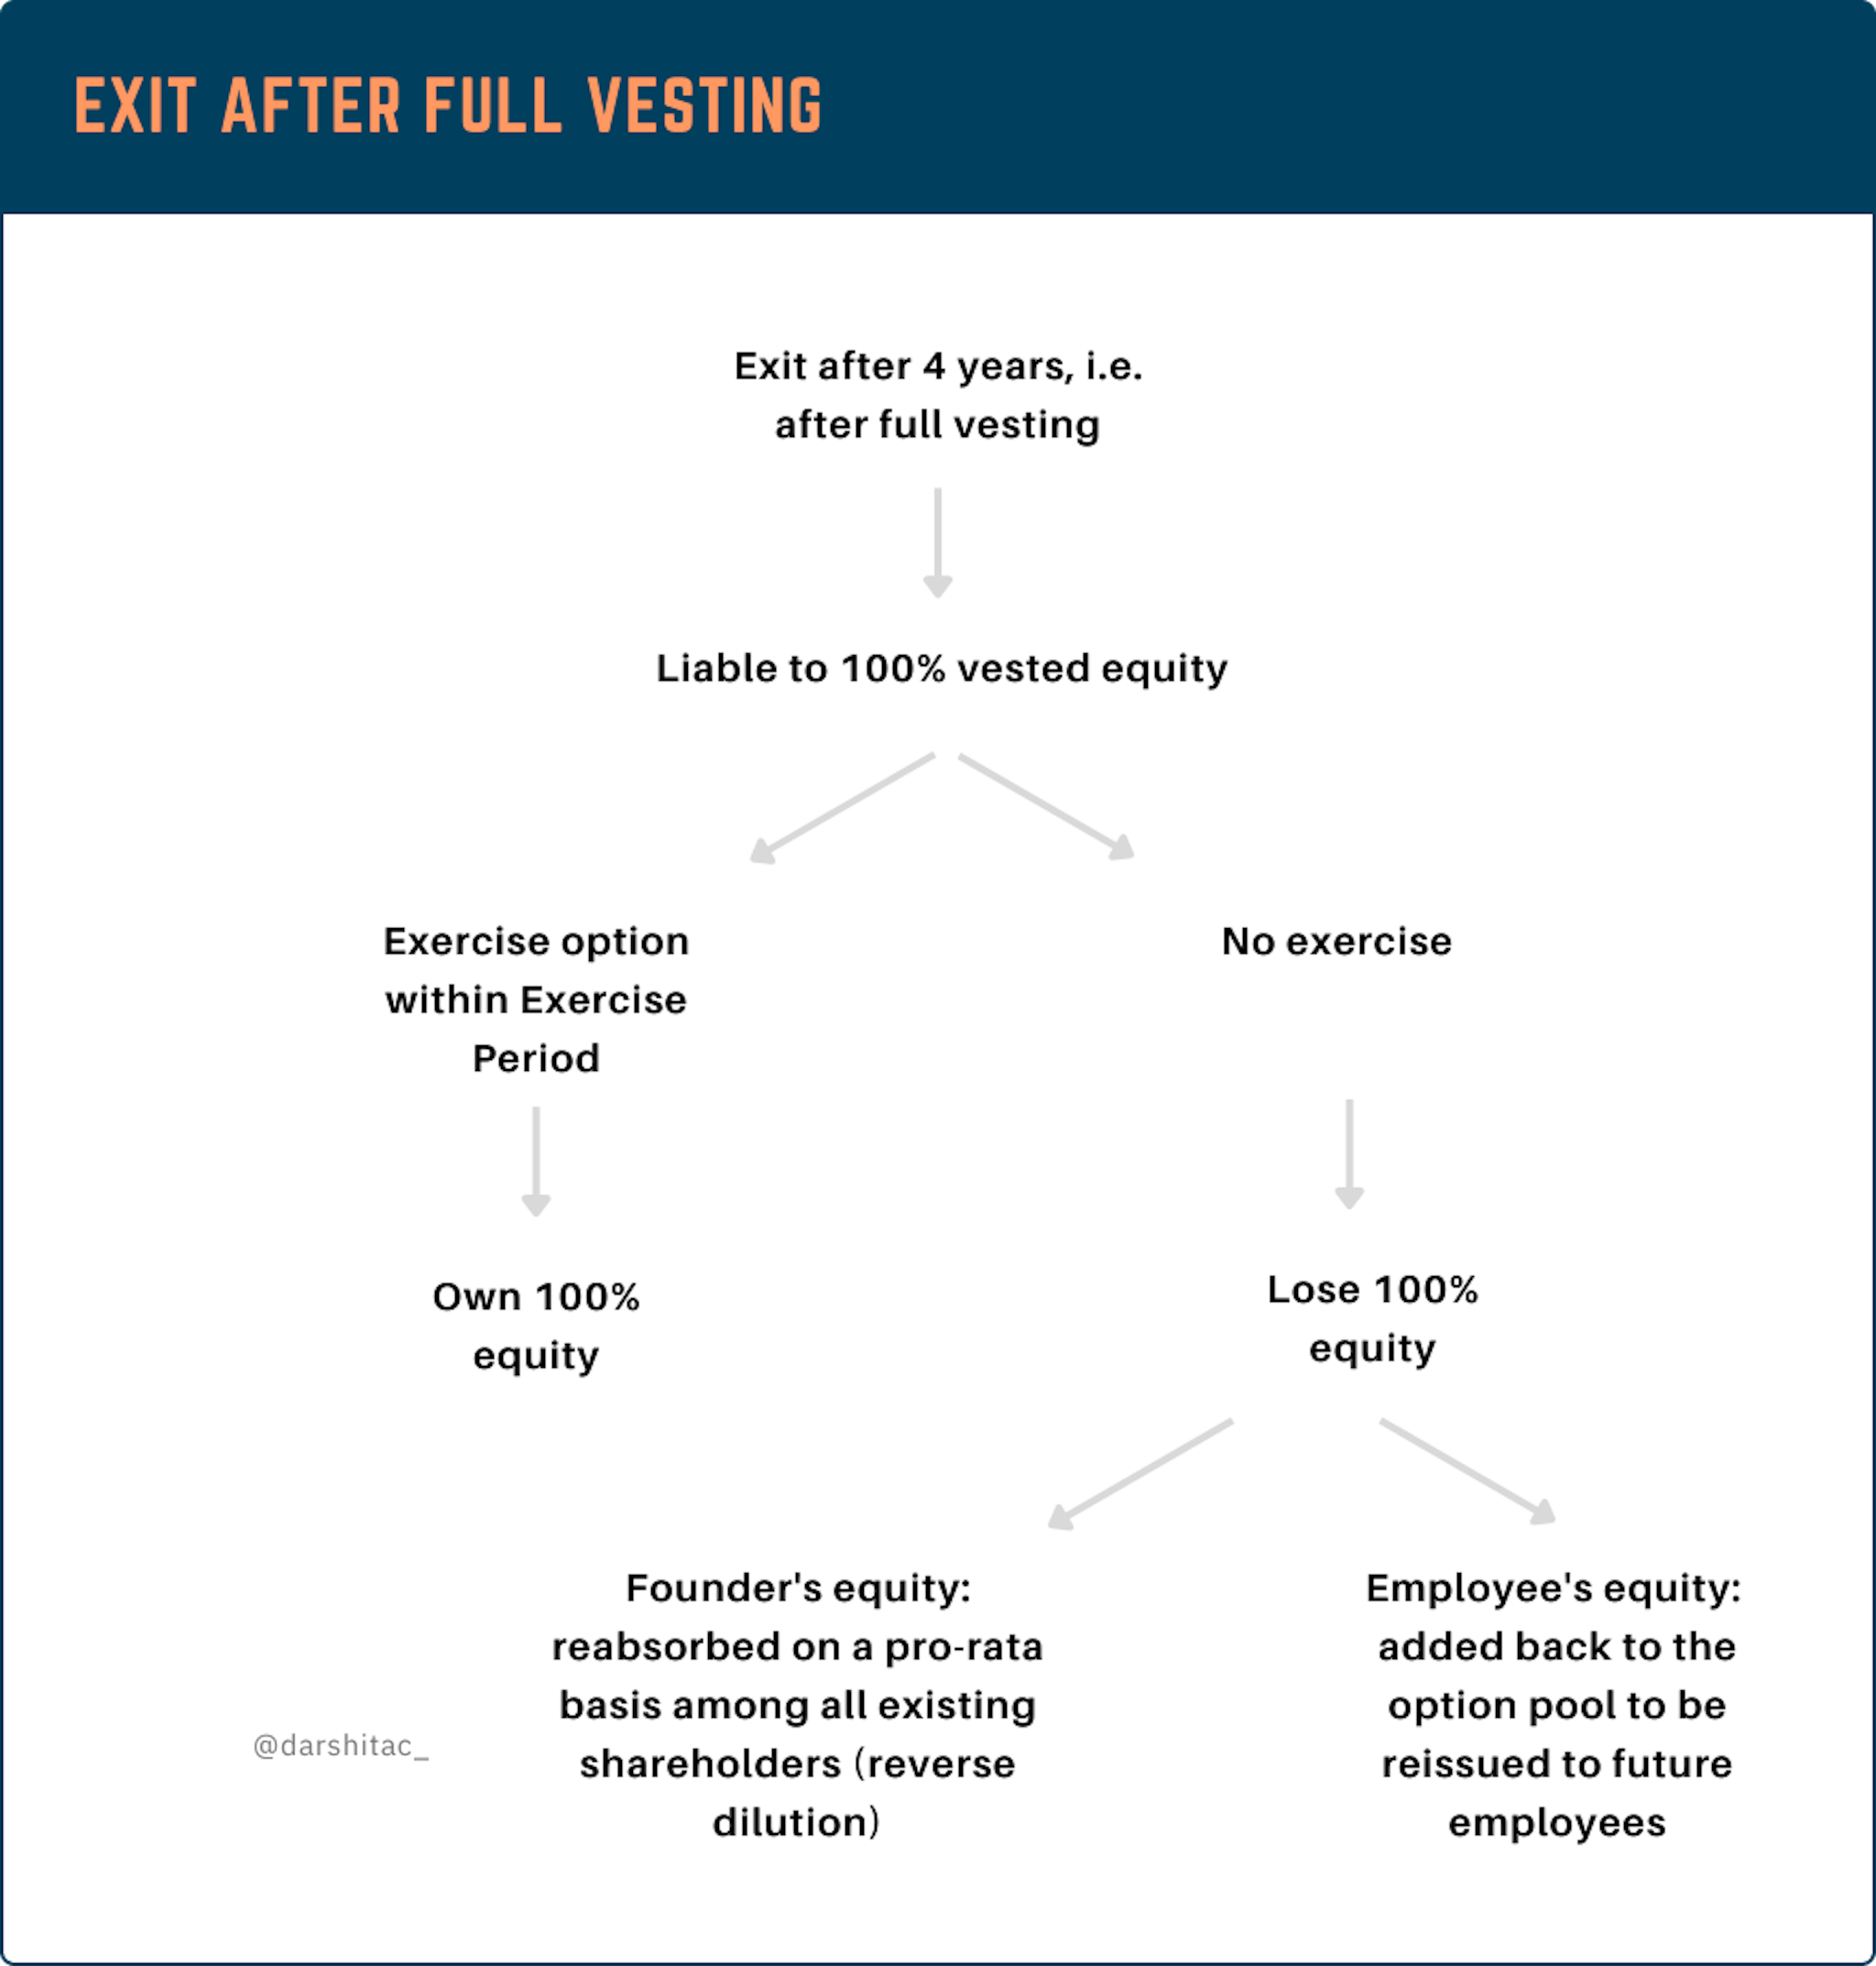 Exit after vesting is complete